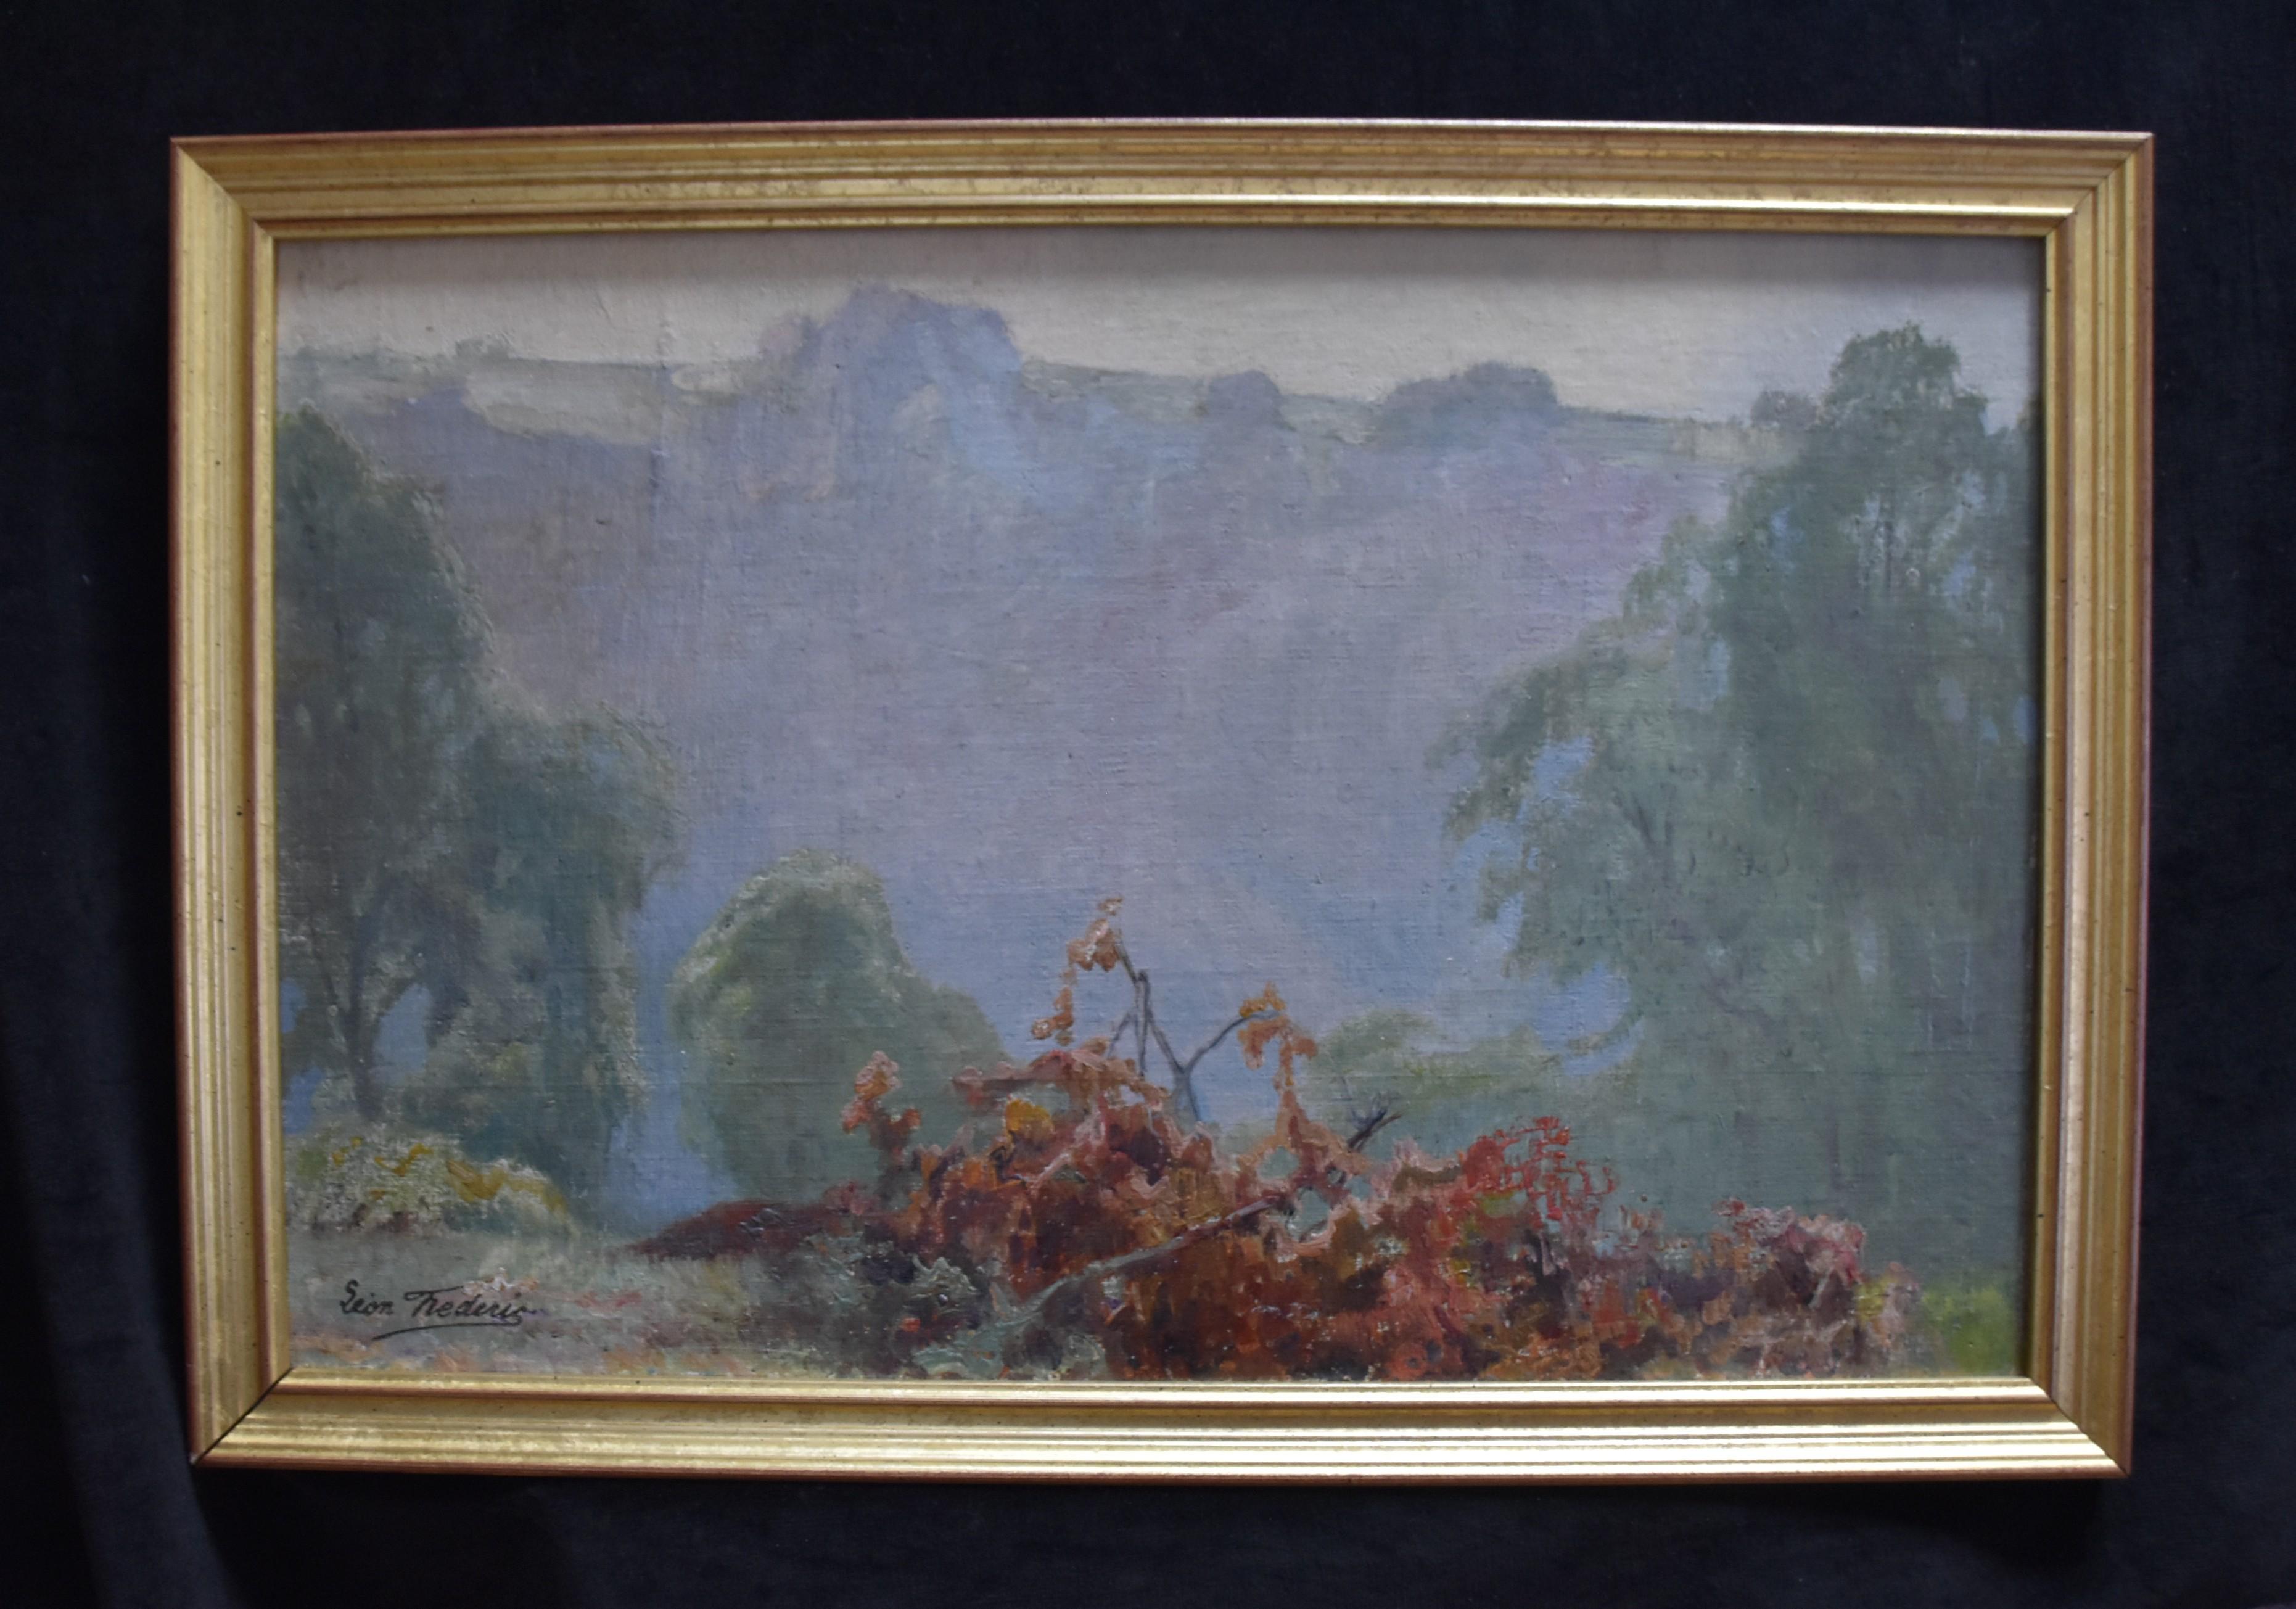 Léon Frédéric (1856-1940) 
Vallée de Nafraiture
signed with the estate stamp at the lower left
Oil on canvas transfered on panel
29.5 x 44.55 cm
Certificate of Georges Frederic, son of the artist, on the reverse of the panel
Framed  :  33.5 x  49 cm